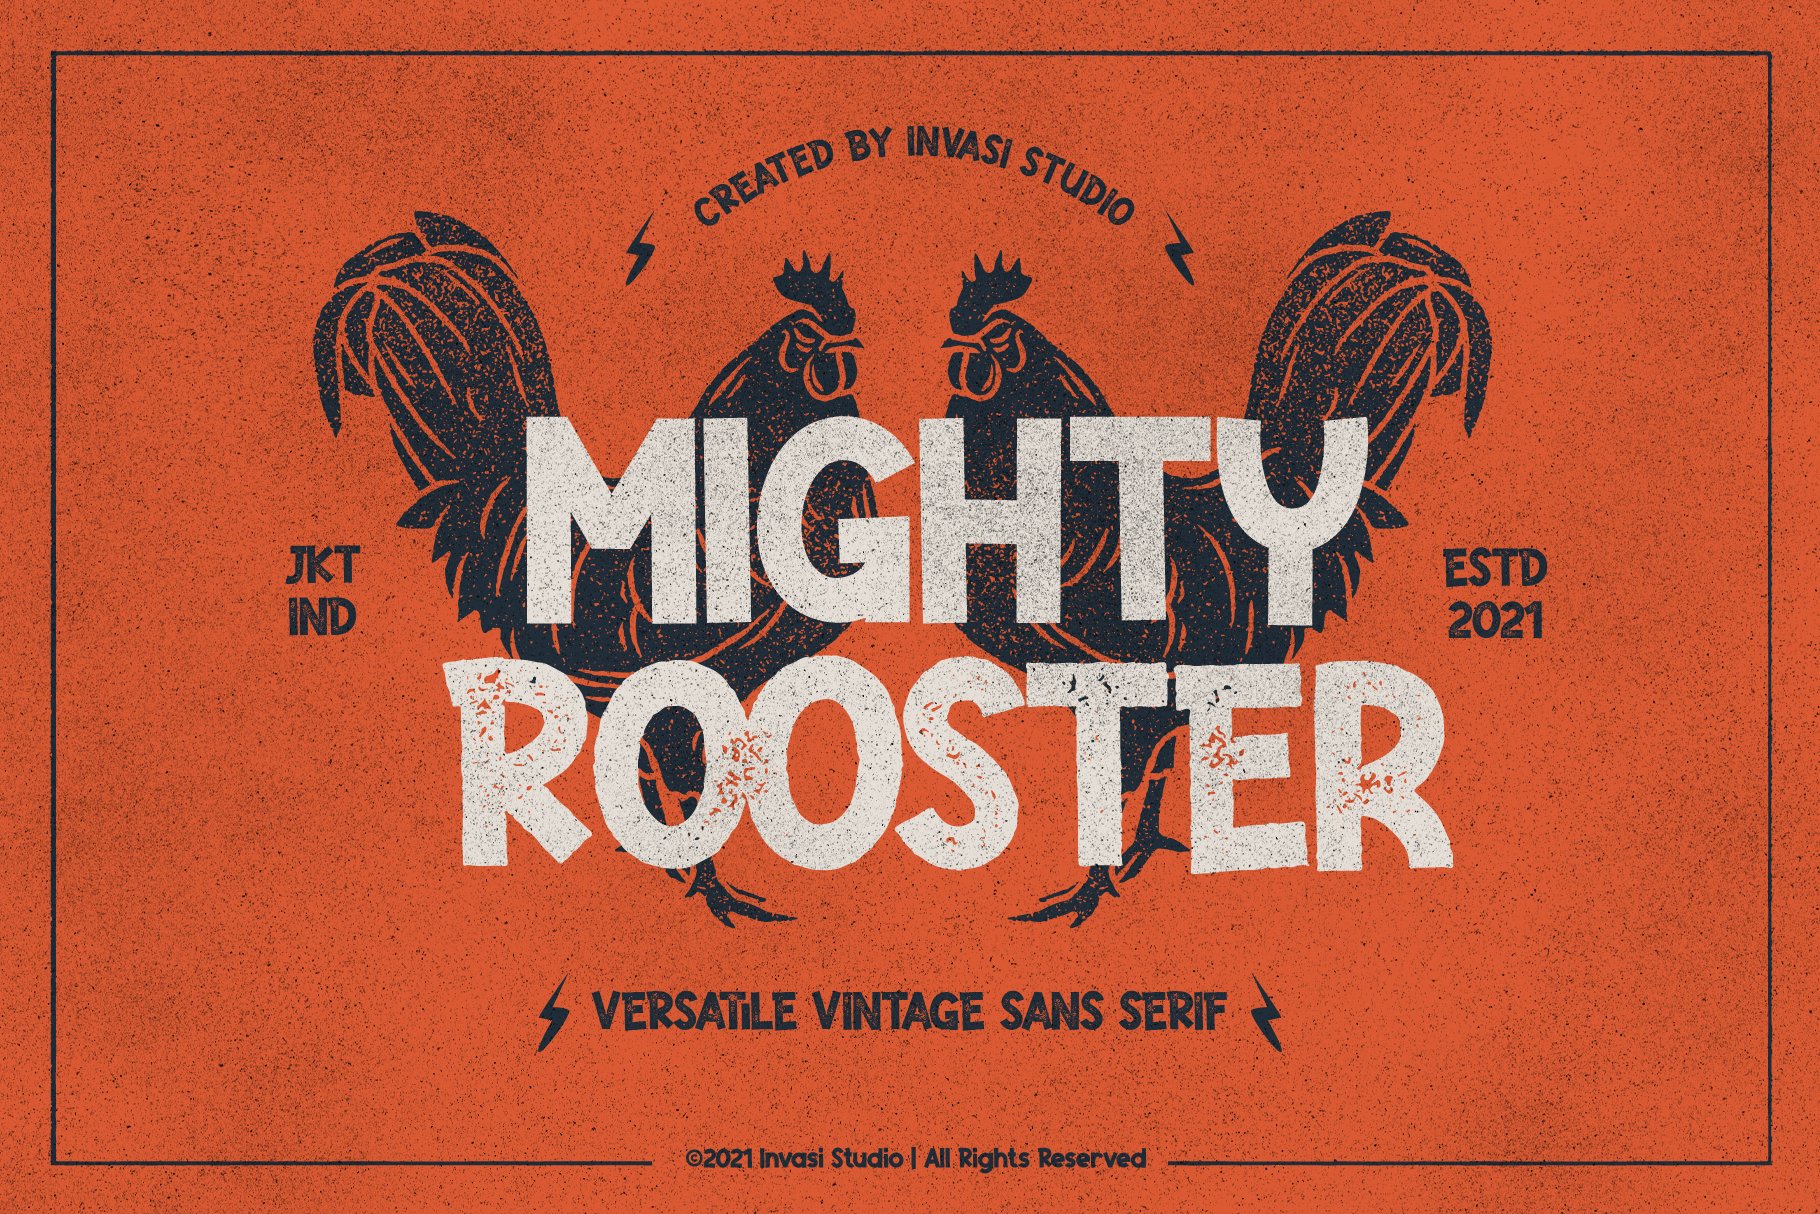 Mighty Rooster - Versatile Vintage cover image.